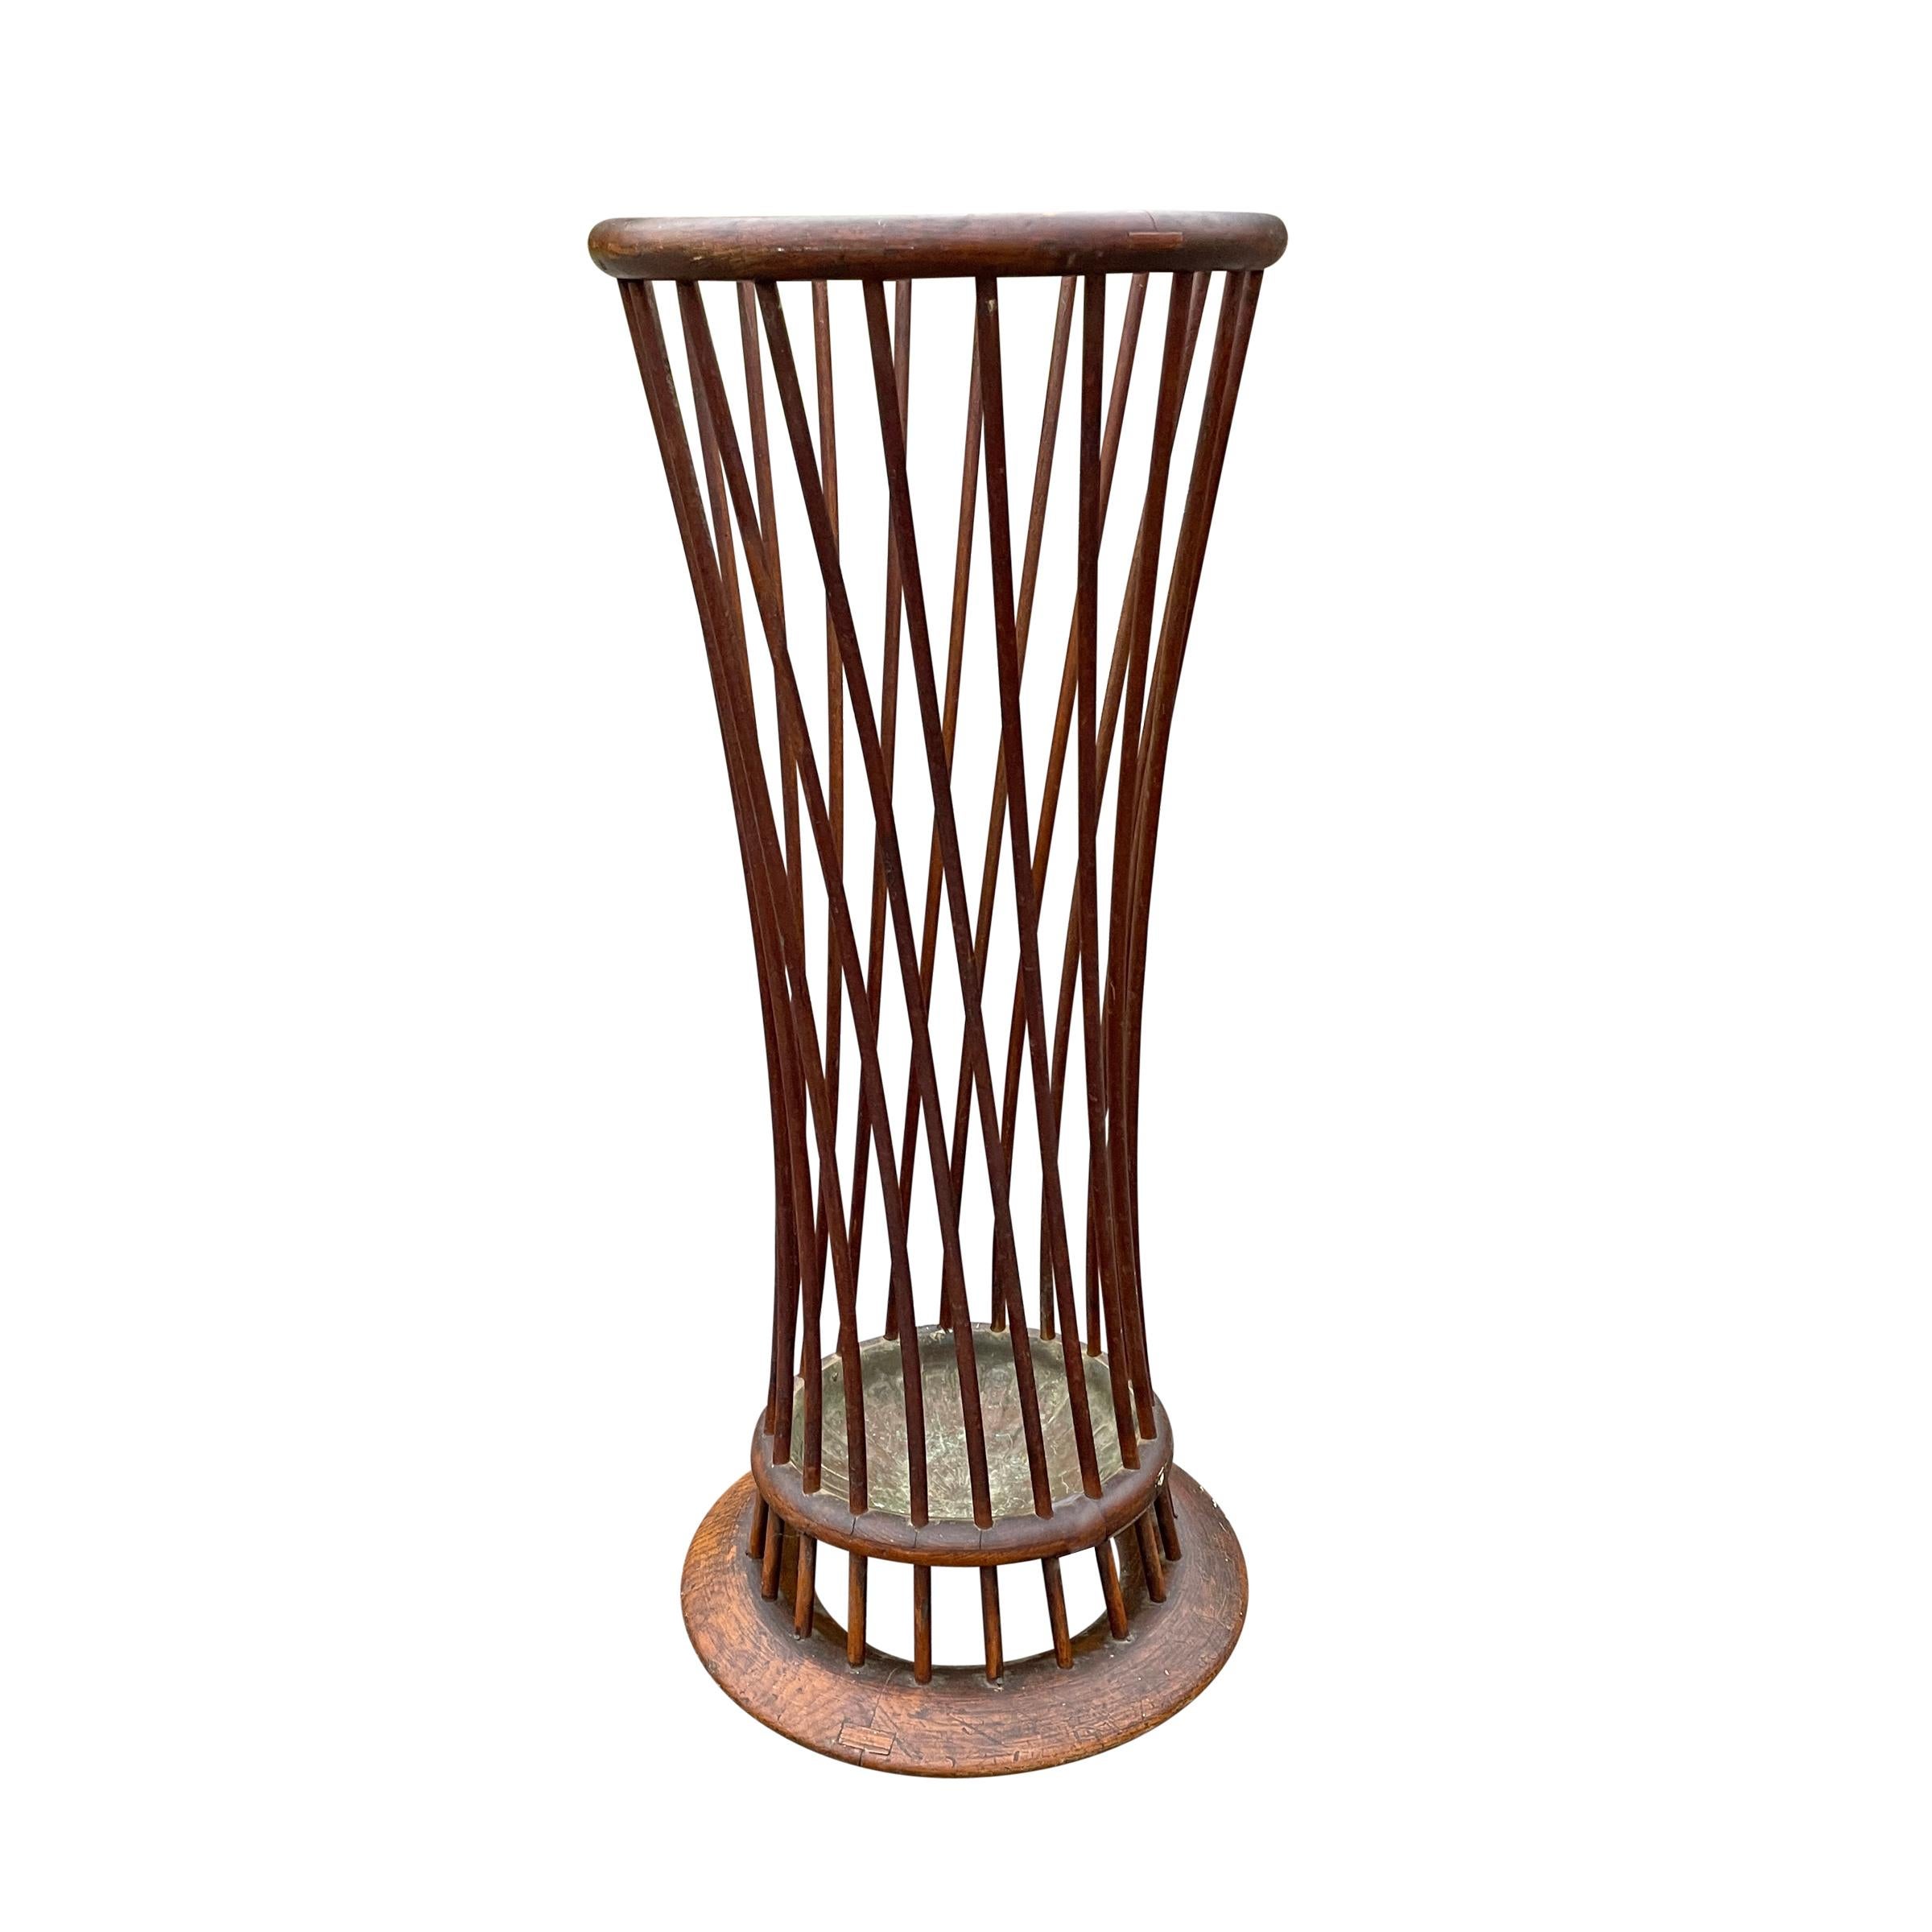 European Early 20th Century Umbrella Stand For Sale